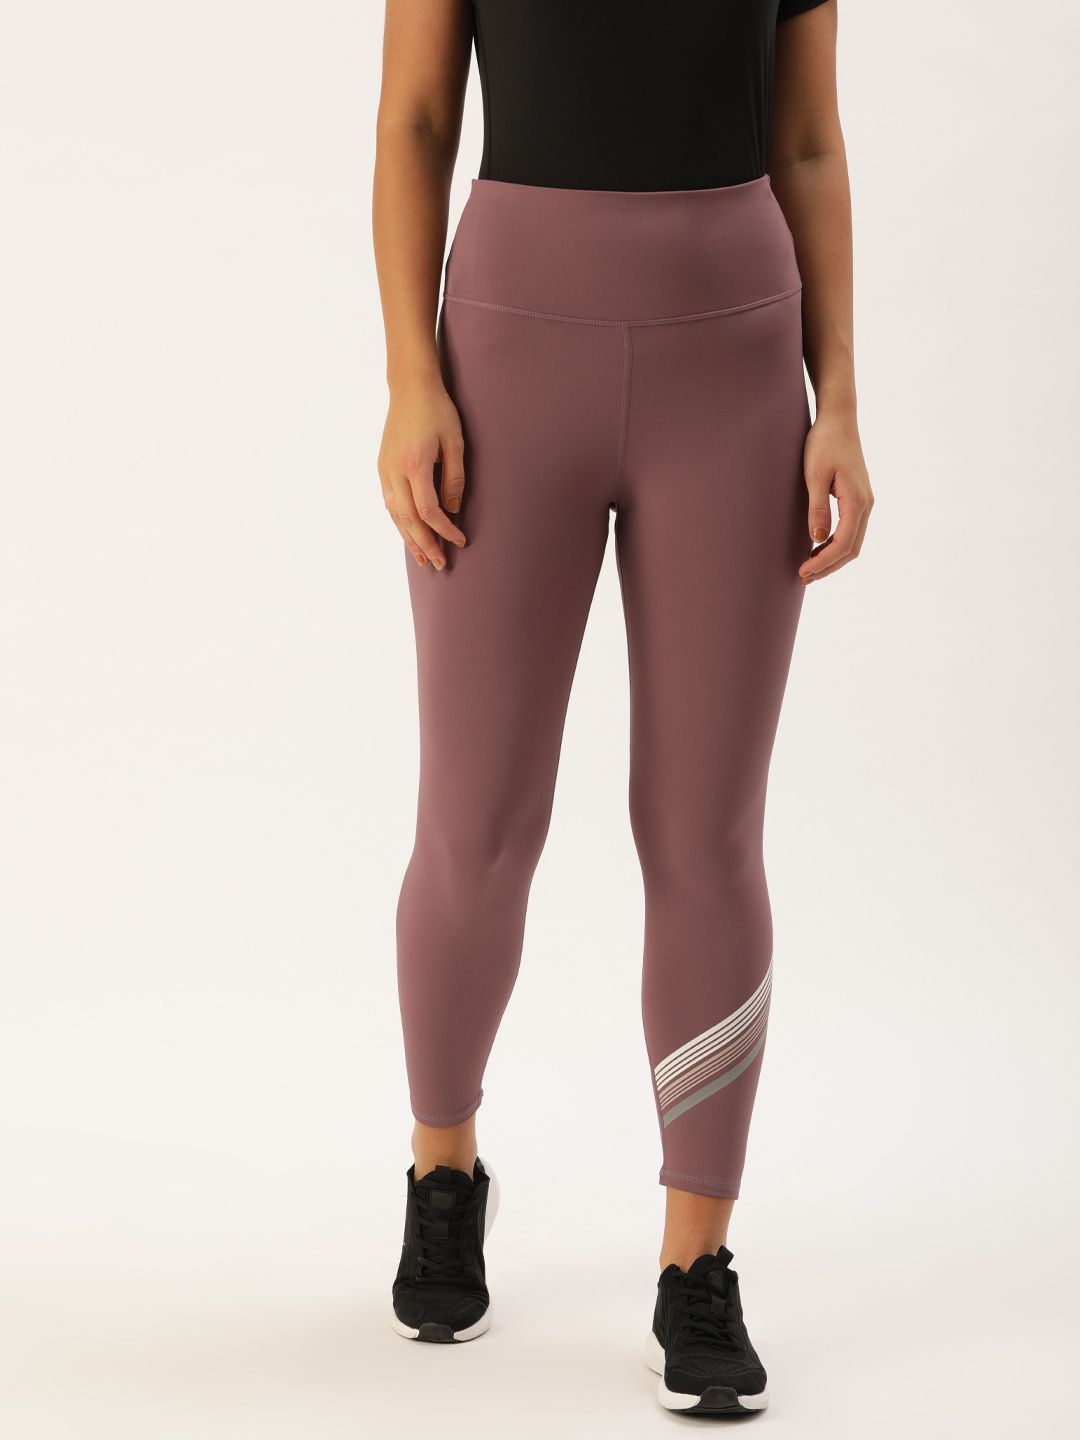 Enamor Women Athleisure Mauve Solid Hugged Fit Gym Training Legging Price in India